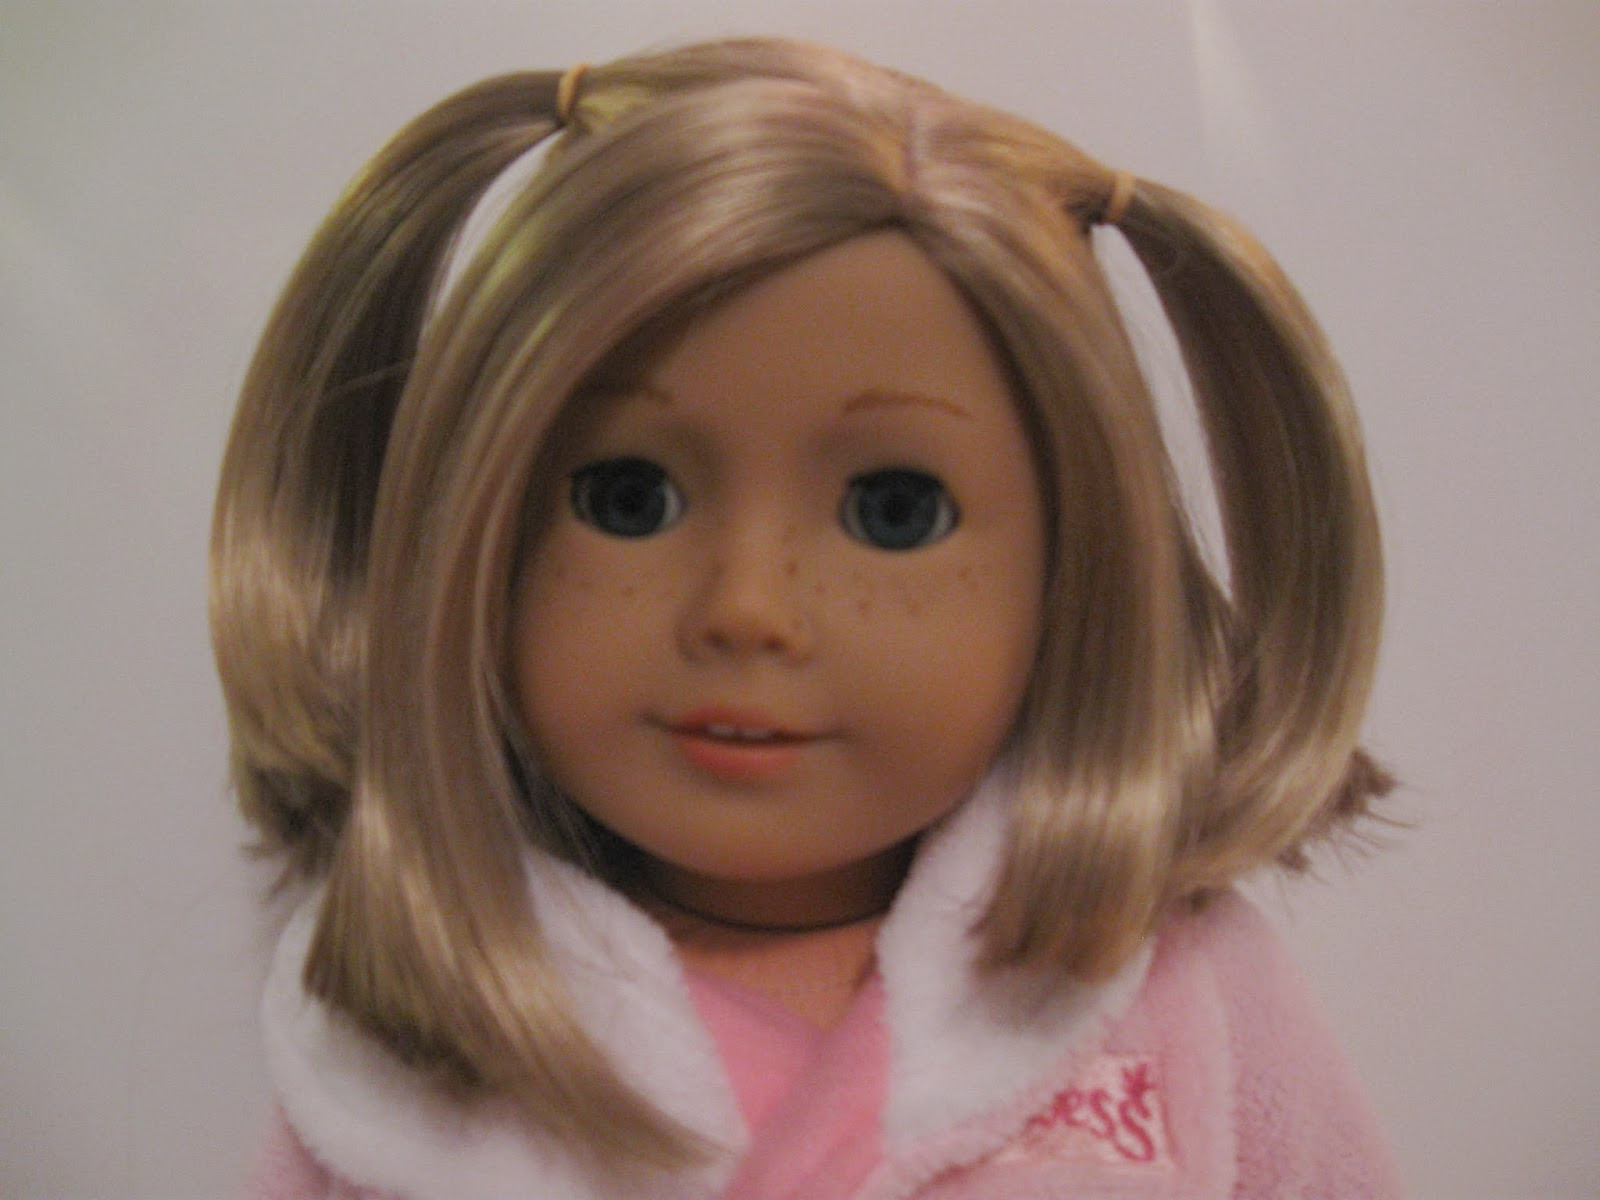 Cute Doll Hairstyles
 Seastar Studios Hairstyles for Dolls with Short Hair